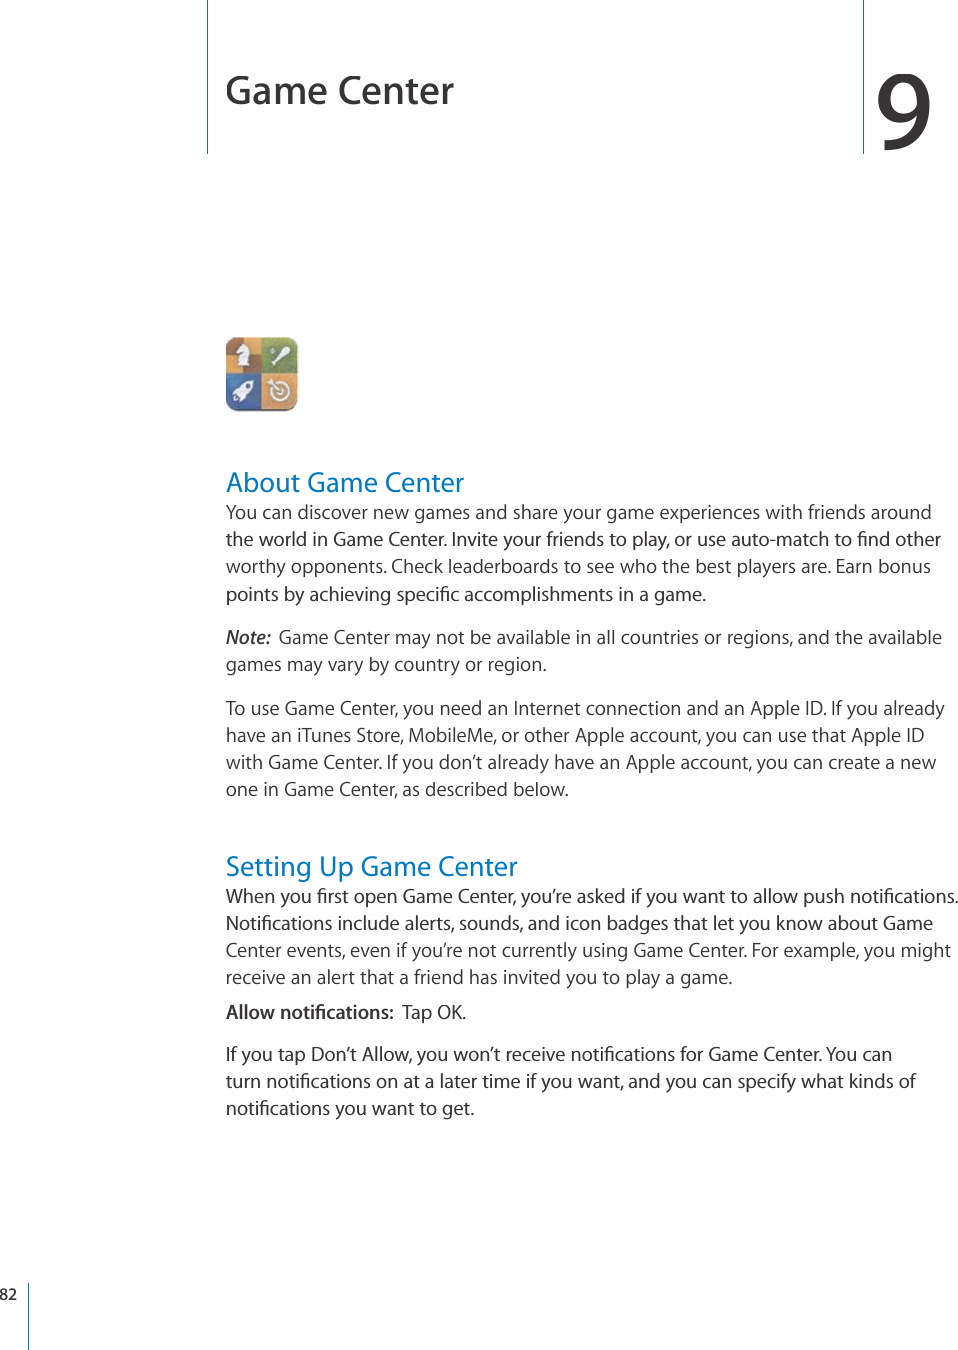 Game Center9About Game CenterYou can discover new games and share your game experiences with friends aroundVJGYQTNFKP)COG%GPVGT+PXKVG[QWTHTKGPFUVQRNC[QTWUGCWVQOCVEJVQ°PFQVJGTworthy opponents. Check leaderboards to see who the best players are. Earn bonusRQKPVUD[CEJKGXKPIURGEK°ECEEQORNKUJOGPVUKPCICOGNote:Game Center may not be available in all countries or regions, and the availablegames may vary by country or region.To use Game Center, you need an Internet connection and an Apple ID. If you alreadyhave an iTunes Store, MobileMe, or other Apple account, you can use that Apple IDwith Game Center. If you don’t already have an Apple account, you can create a newone in Game Center, as described below.Setting Up Game Center9JGP[QW°TUVQRGP)COG%GPVGT[QW¨TGCUMGFKH[QWYCPVVQCNNQYRWUJPQVK°ECVKQPU0QVK°ECVKQPUKPENWFGCNGTVUUQWPFUCPFKEQPDCFIGUVJCVNGV[QWMPQYCDQWV)COGCenter events, even if you’re not currently using Game Center. For example, you mightreceive an alert that a friend has invited you to play a game. #NNQYPQVK°ECVKQPU6CR1-+H[QWVCR&amp;QP¨V#NNQY[QWYQP¨VTGEGKXGPQVK°ECVKQPUHQT)COG%GPVGT;QWECPVWTPPQVK°ECVKQPUQPCVCNCVGTVKOGKH[QWYCPVCPF[QWECPURGEKH[YJCVMKPFUQHPQVK°ECVKQPU[QWYCPVVQIGV82